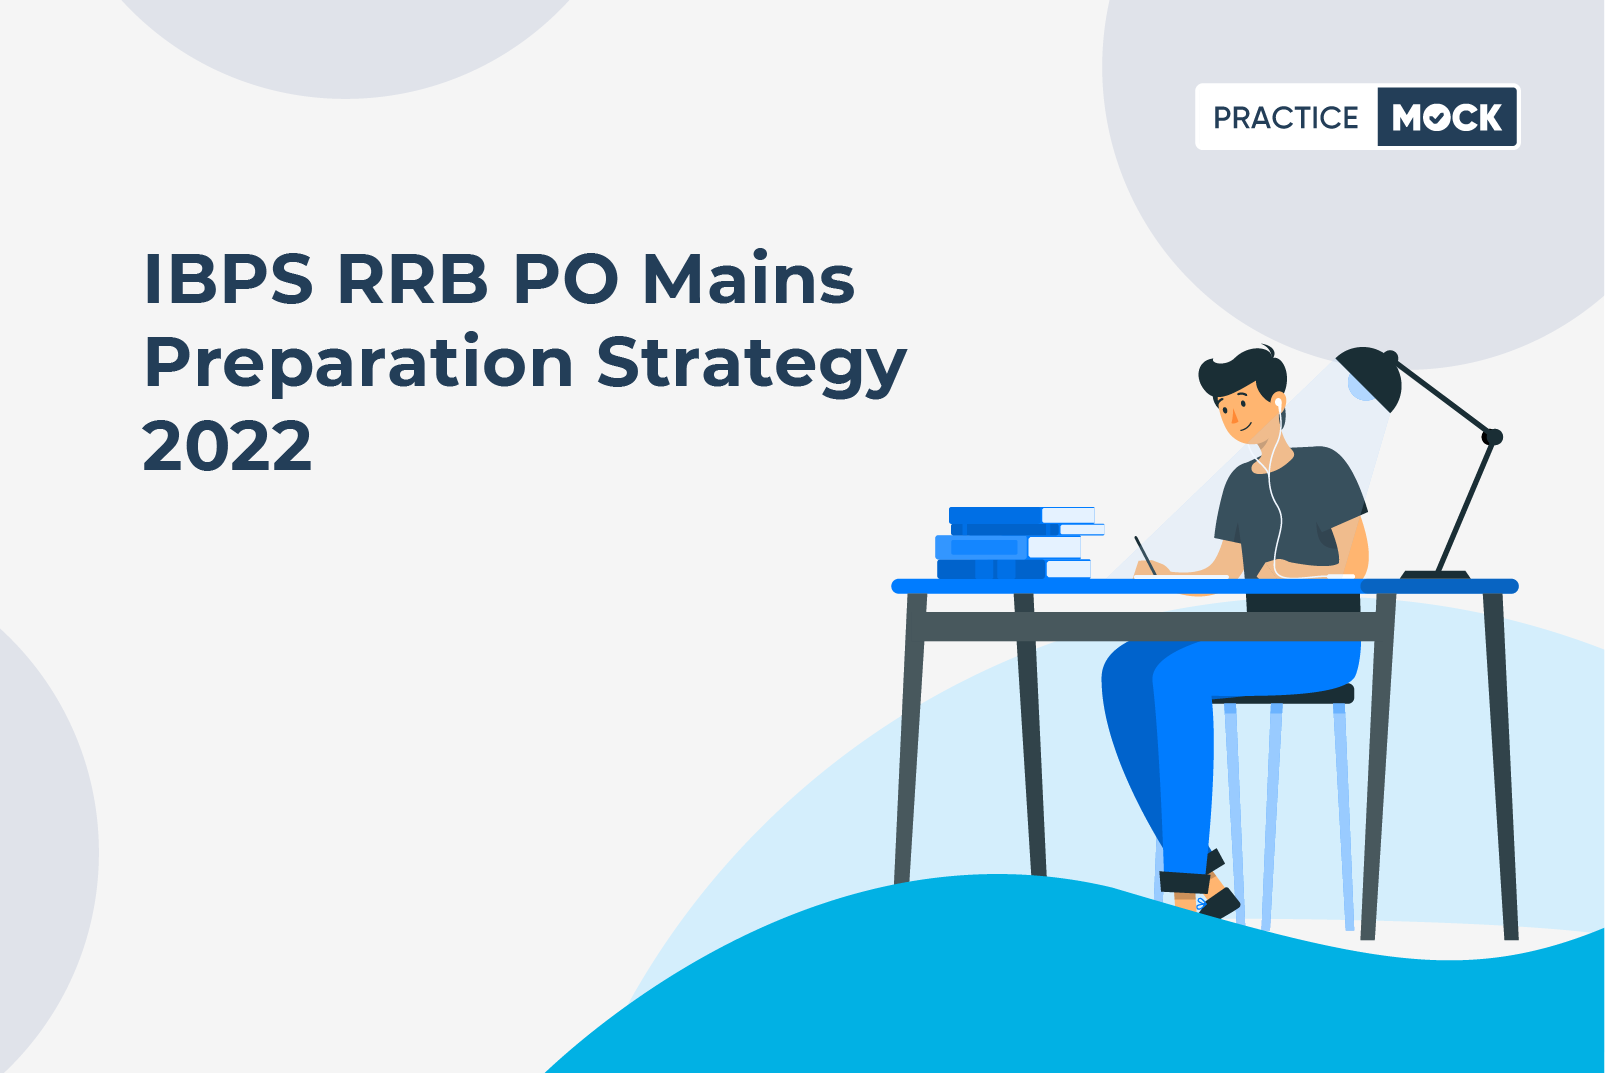 IBPS RRB PO Mains 2022 Preparation strategy